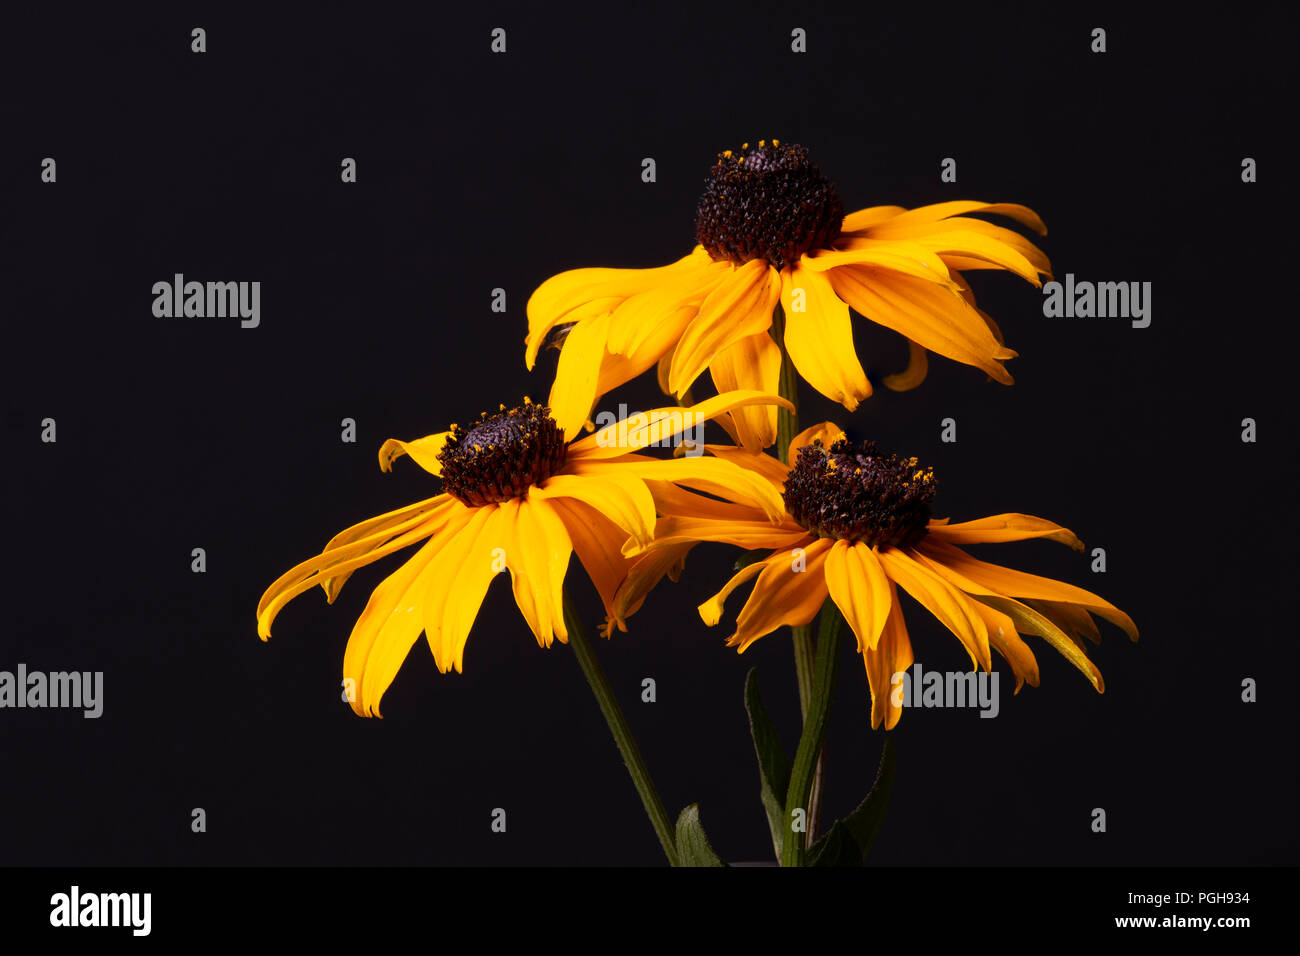 An image of three Rudbeckia flowers, a North American plant of the daisy family with yellow or orange flowers and a dark cone-like centre, taken again Stock Photo